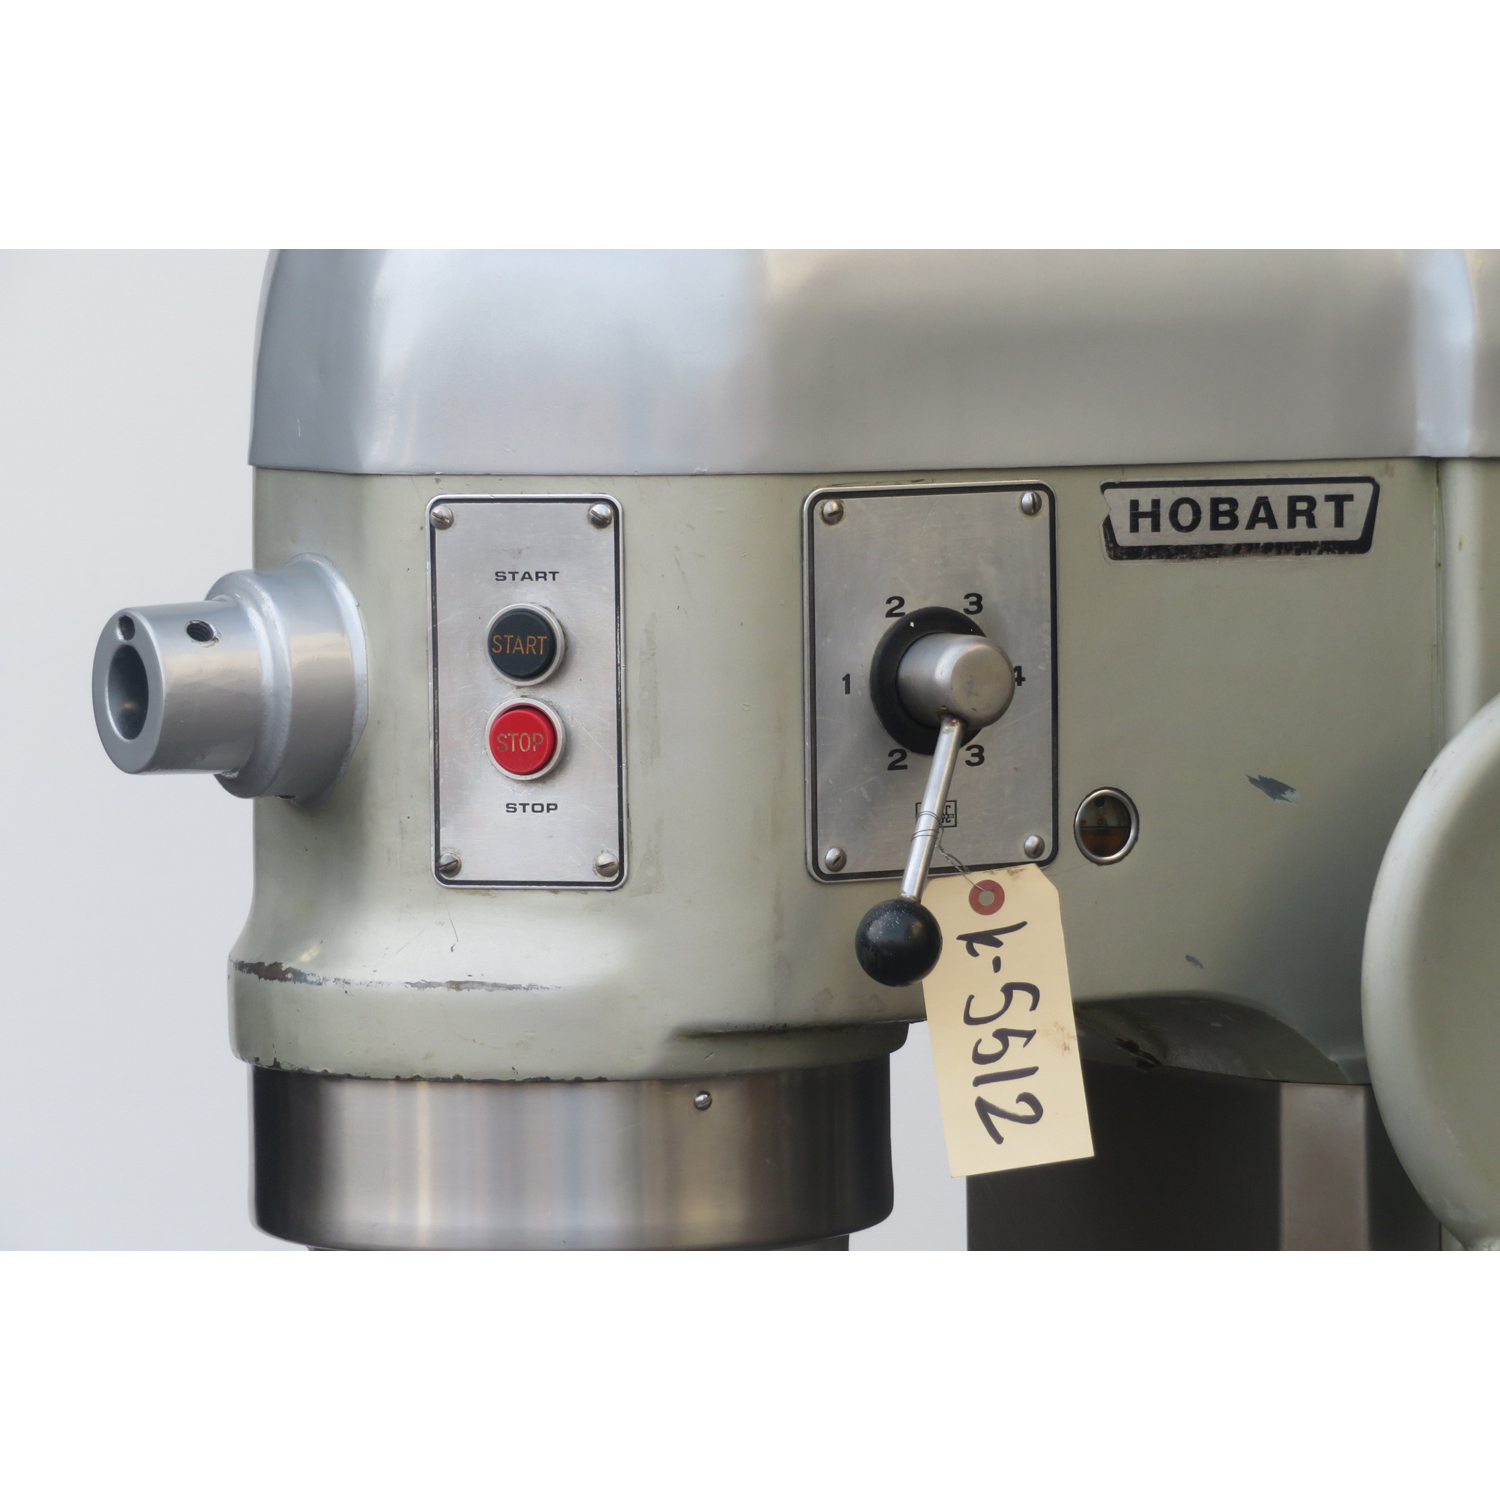 Hobart 60 Quart H600 Mixer, Used Excellent Condition image 1